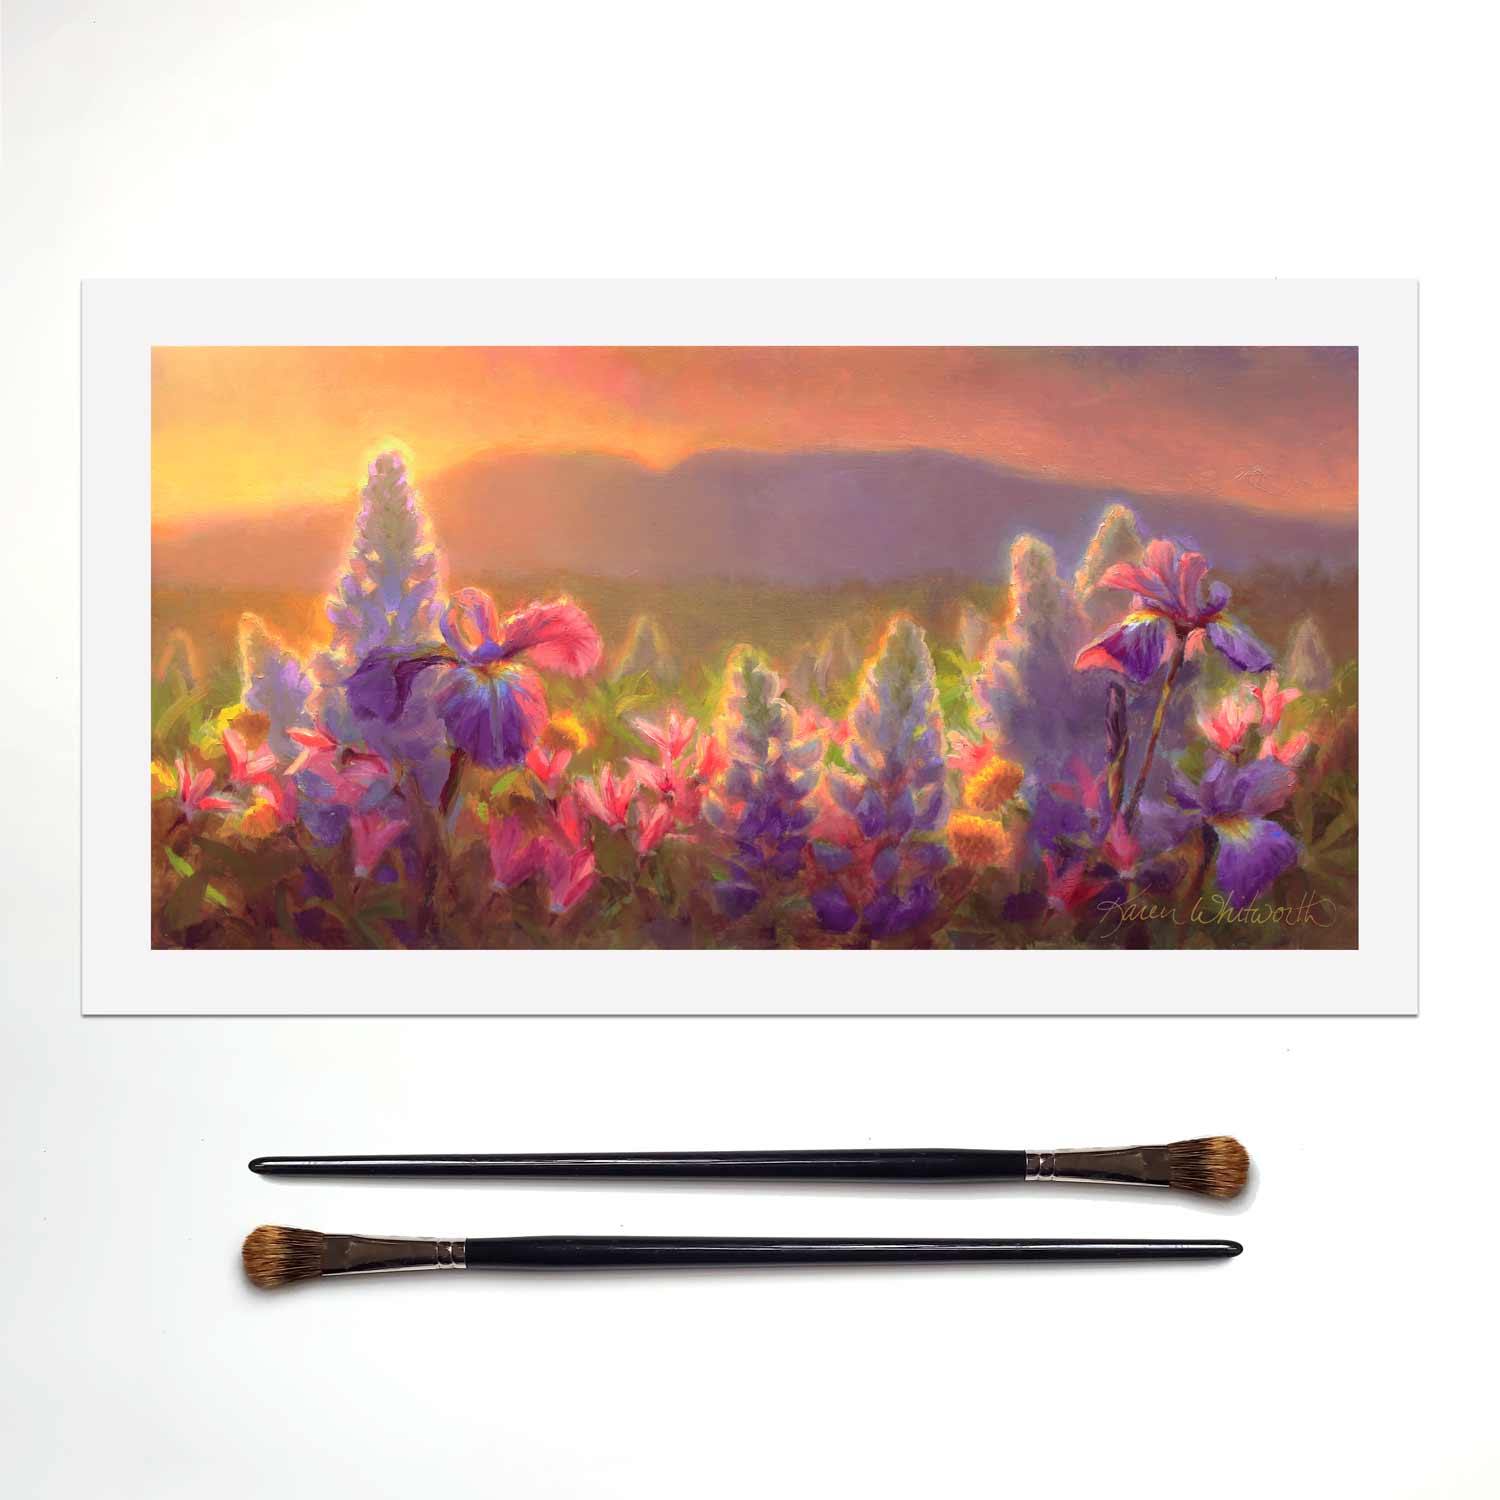 Sleeping Lady Alaska wall art mountain landscape painting of wildflowers and Mt Susitna. The artwork is sitting on a white table next to 2 paintbrushes.